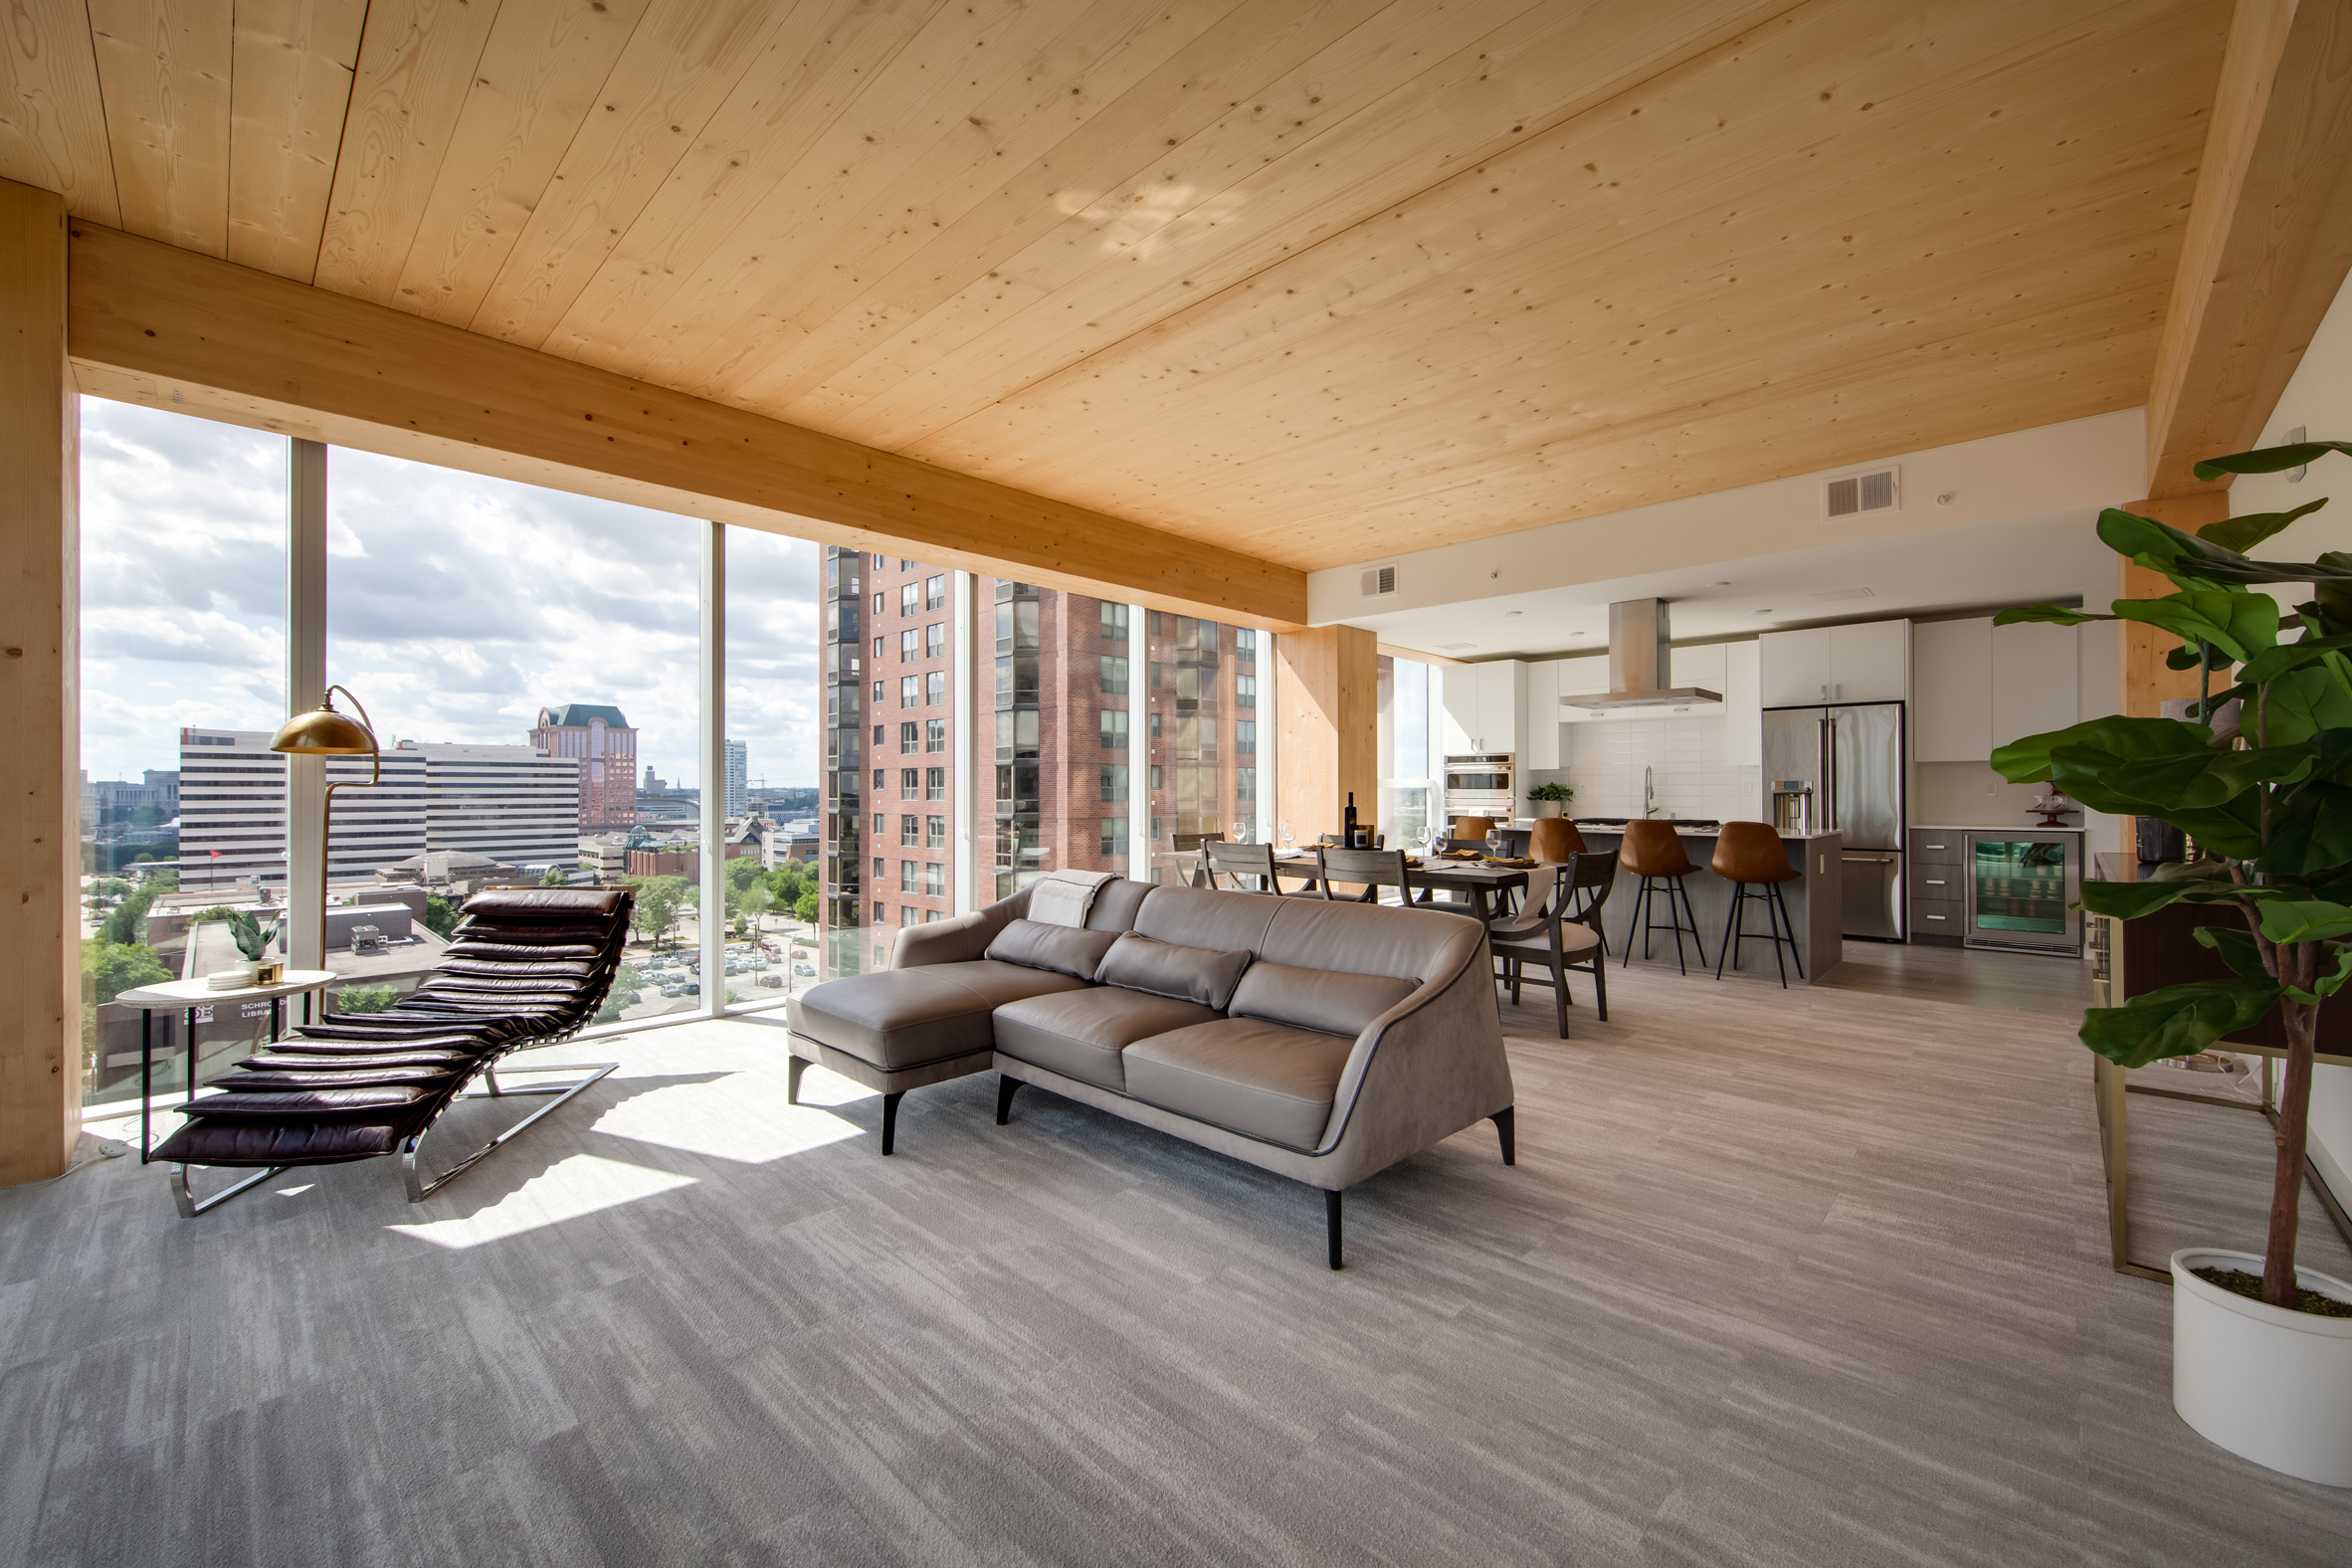 Apartment in Ascent tower with wooden ceiling